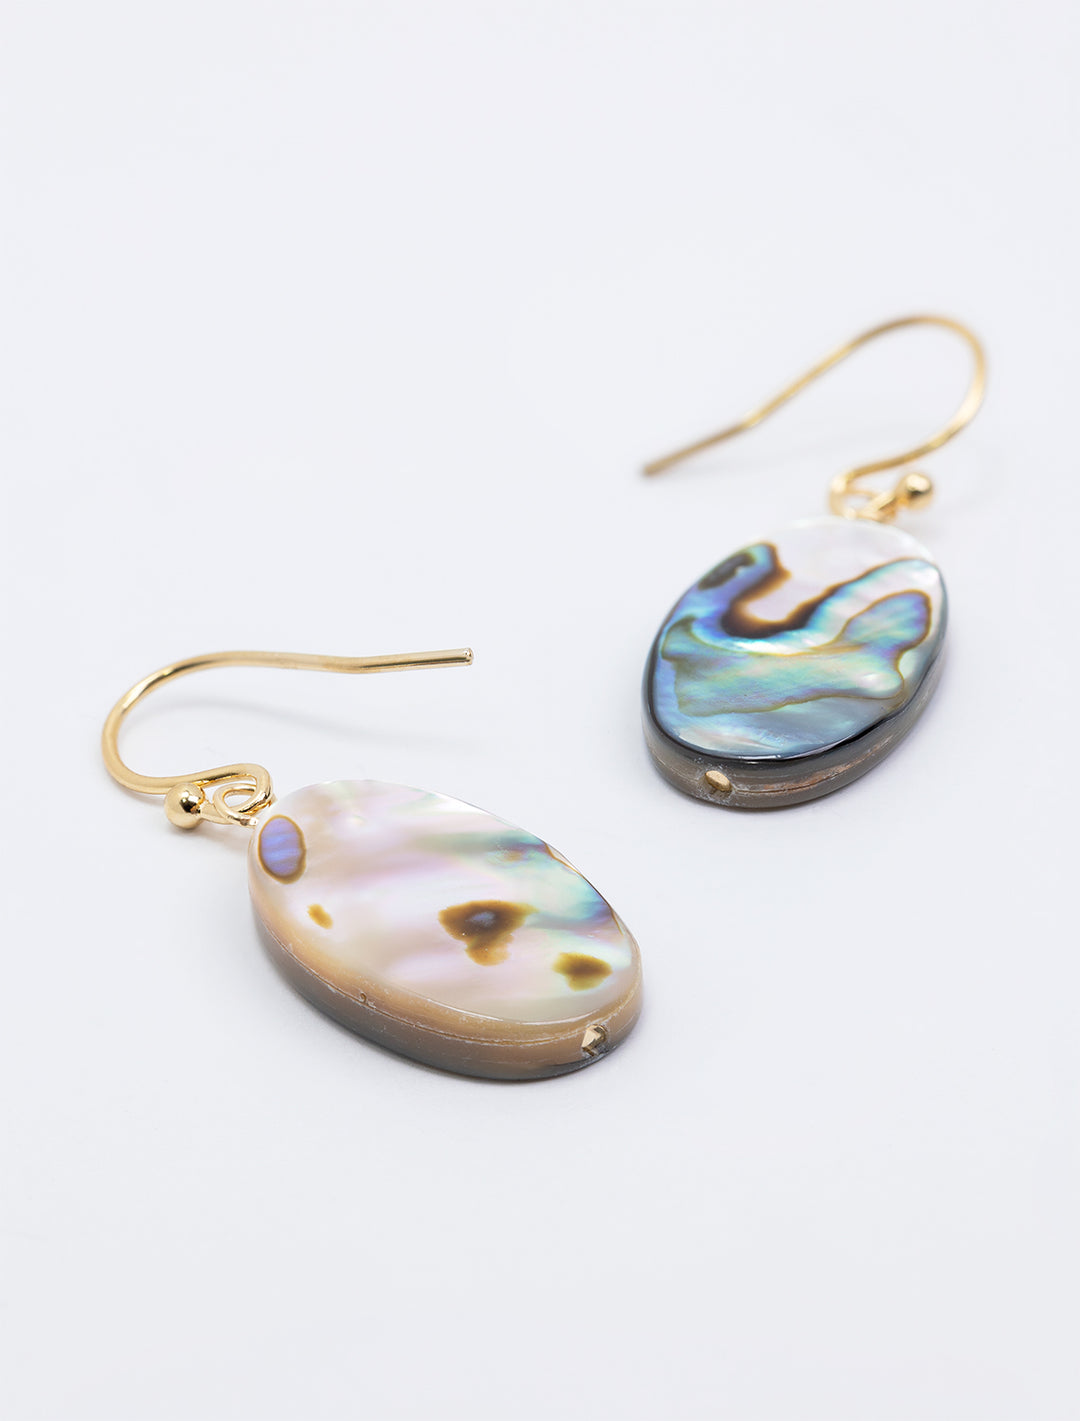 Opposite side view of AV Max's oval abalone and mother of pearl earrings.